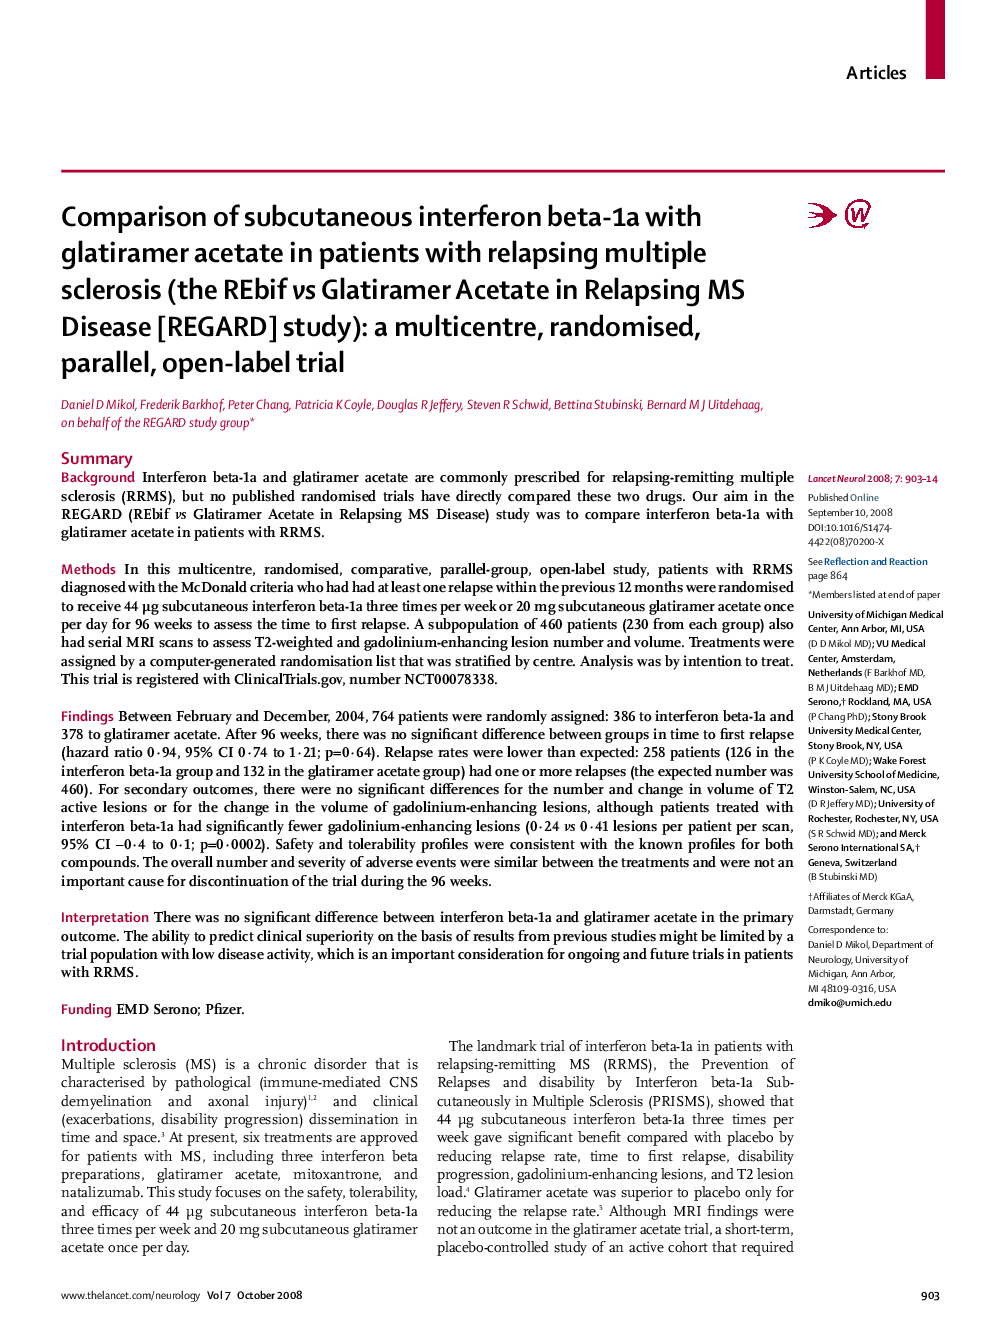 Comparison of subcutaneous interferon beta-1a with glatiramer acetate in patients with relapsing multiple sclerosis (the REbif vs Glatiramer Acetate in Relapsing MS Disease [REGARD] study): a multicentre, randomised, parallel, open-label trial